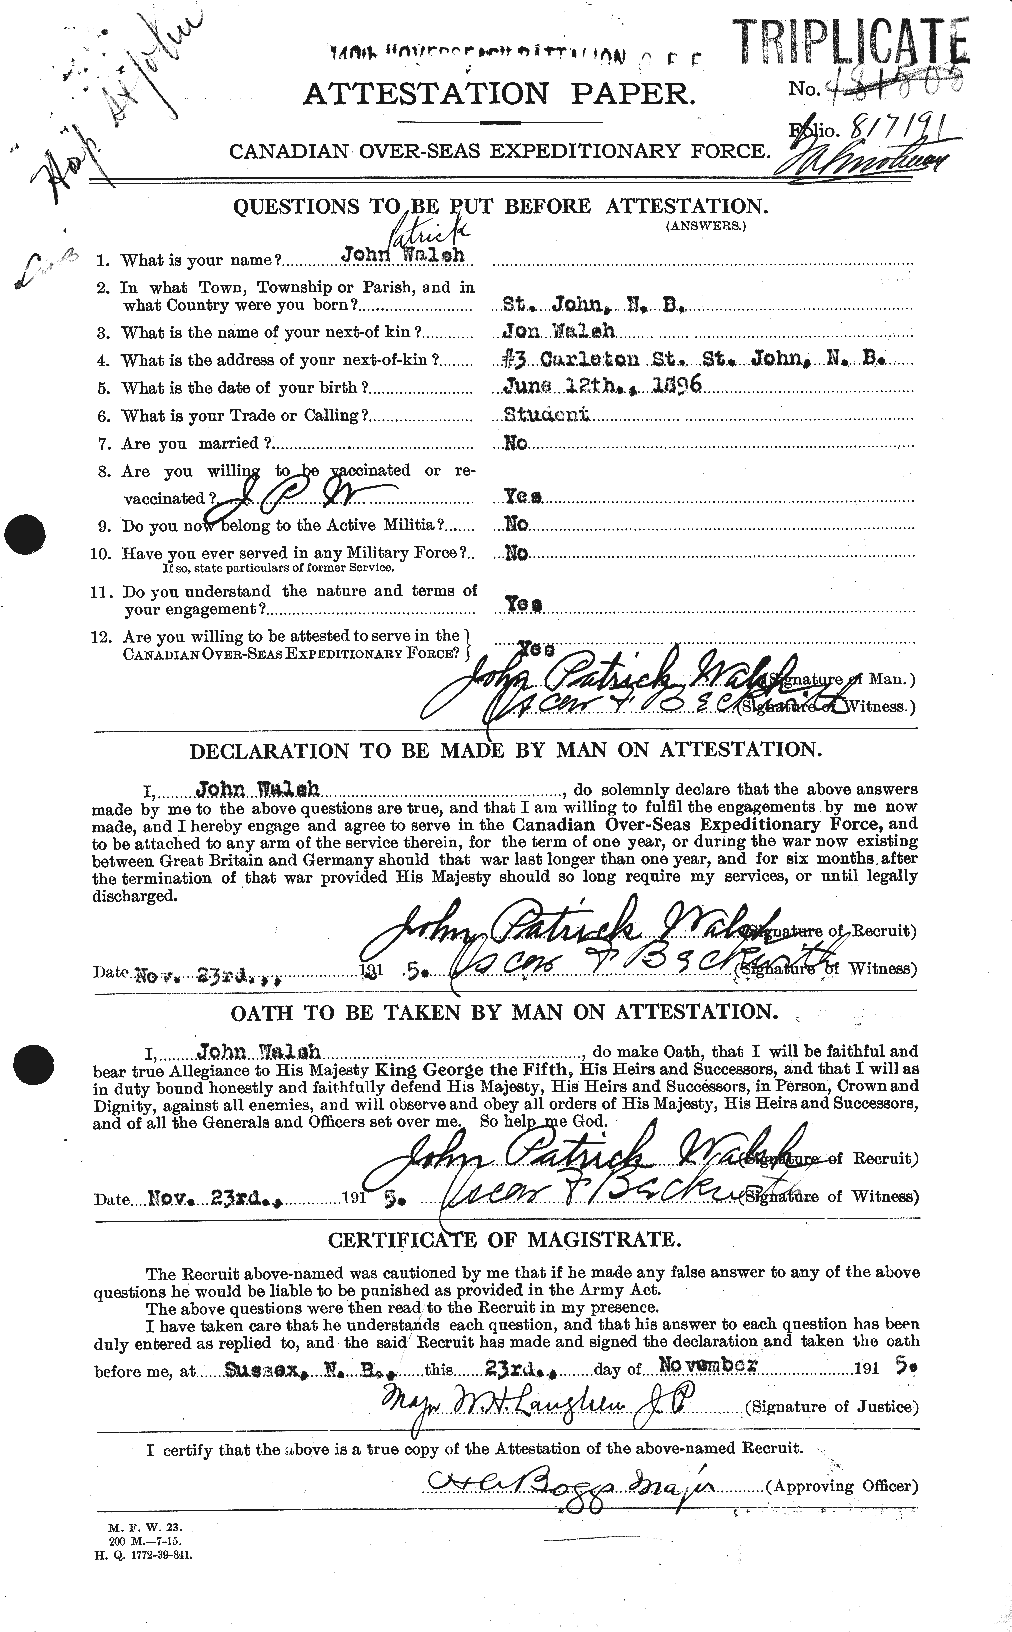 Personnel Records of the First World War - CEF 653367a